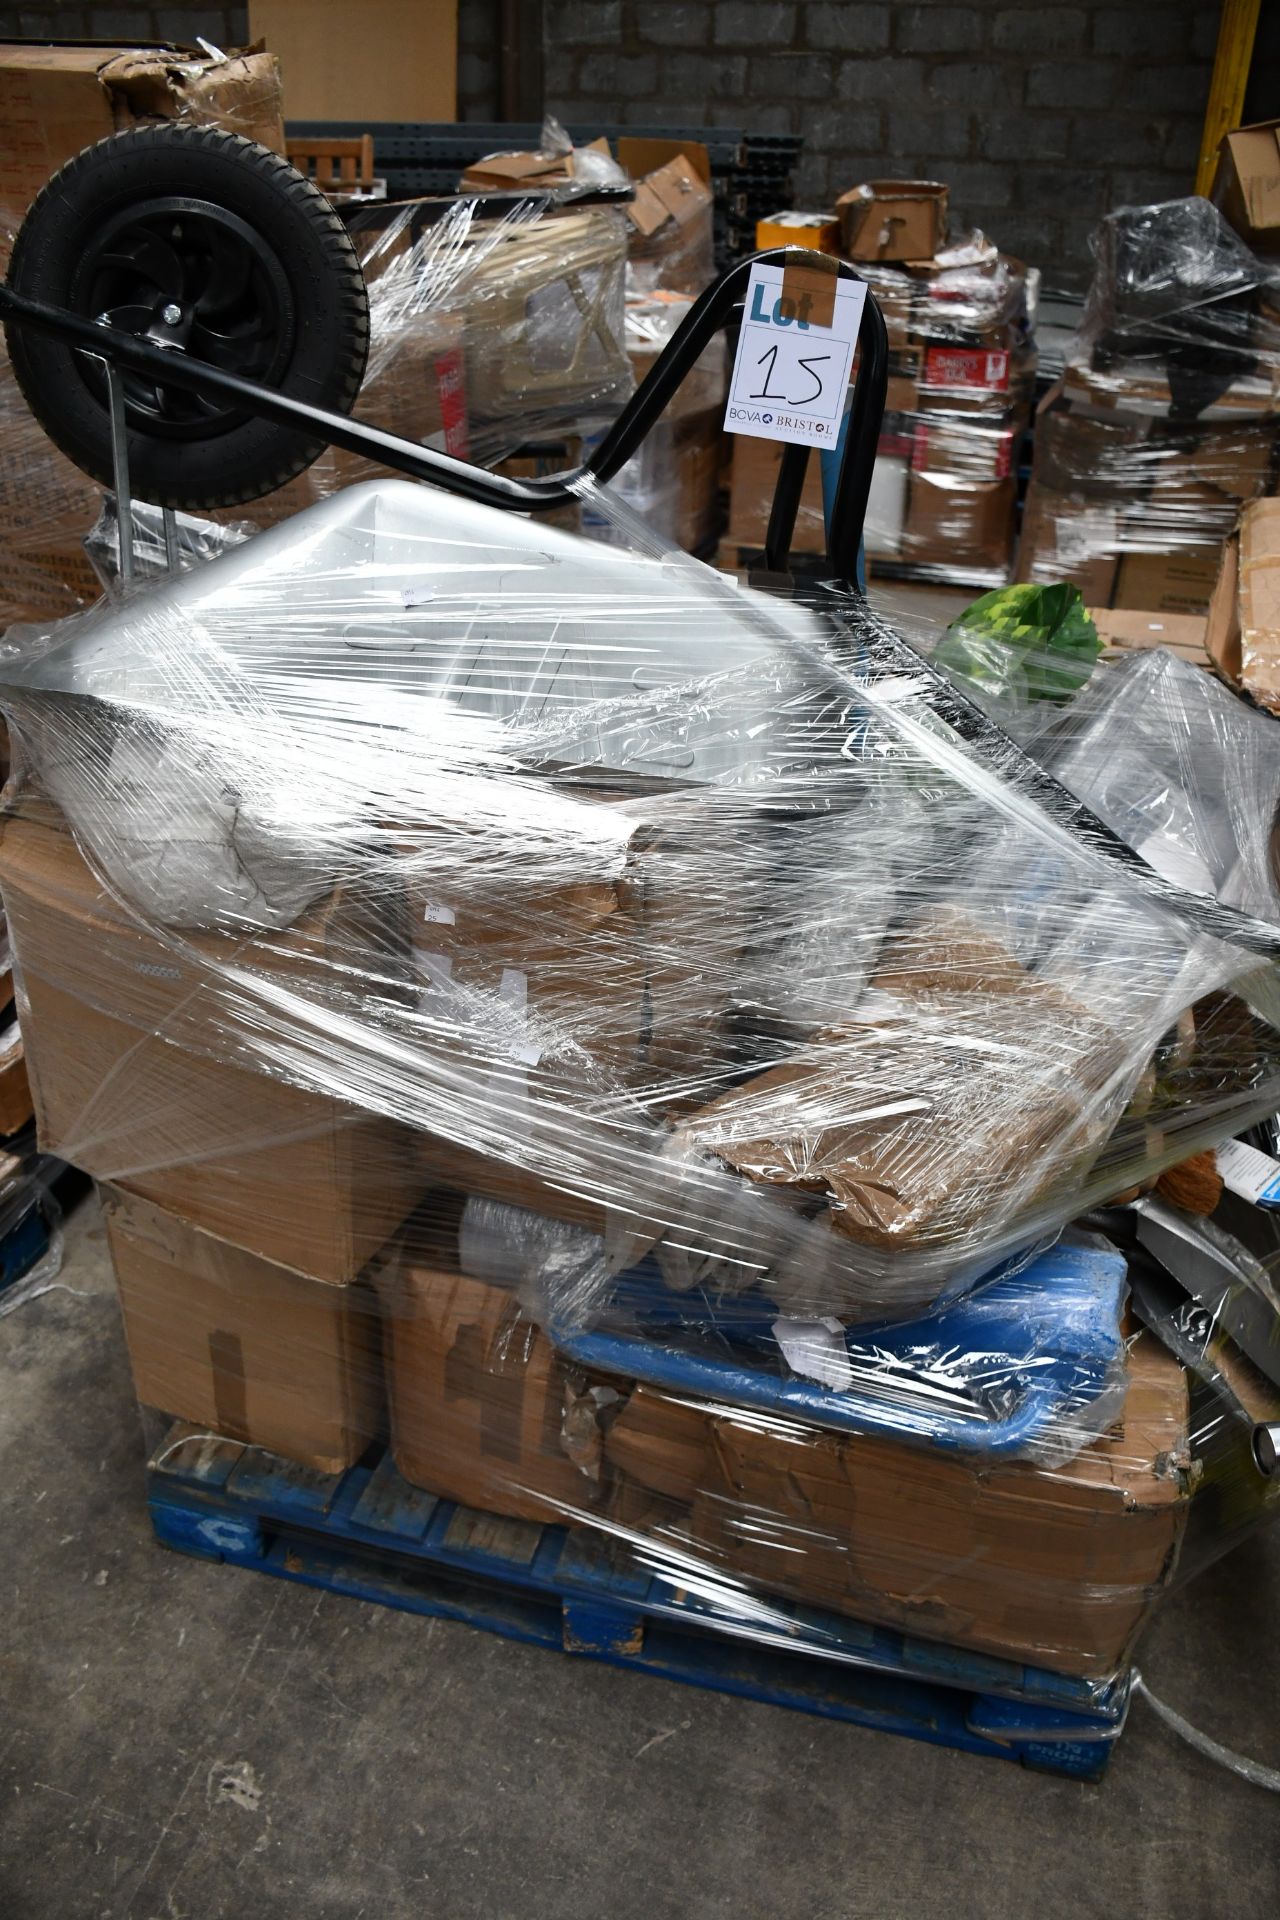 A pallet of assorted garden/pet and other related items.